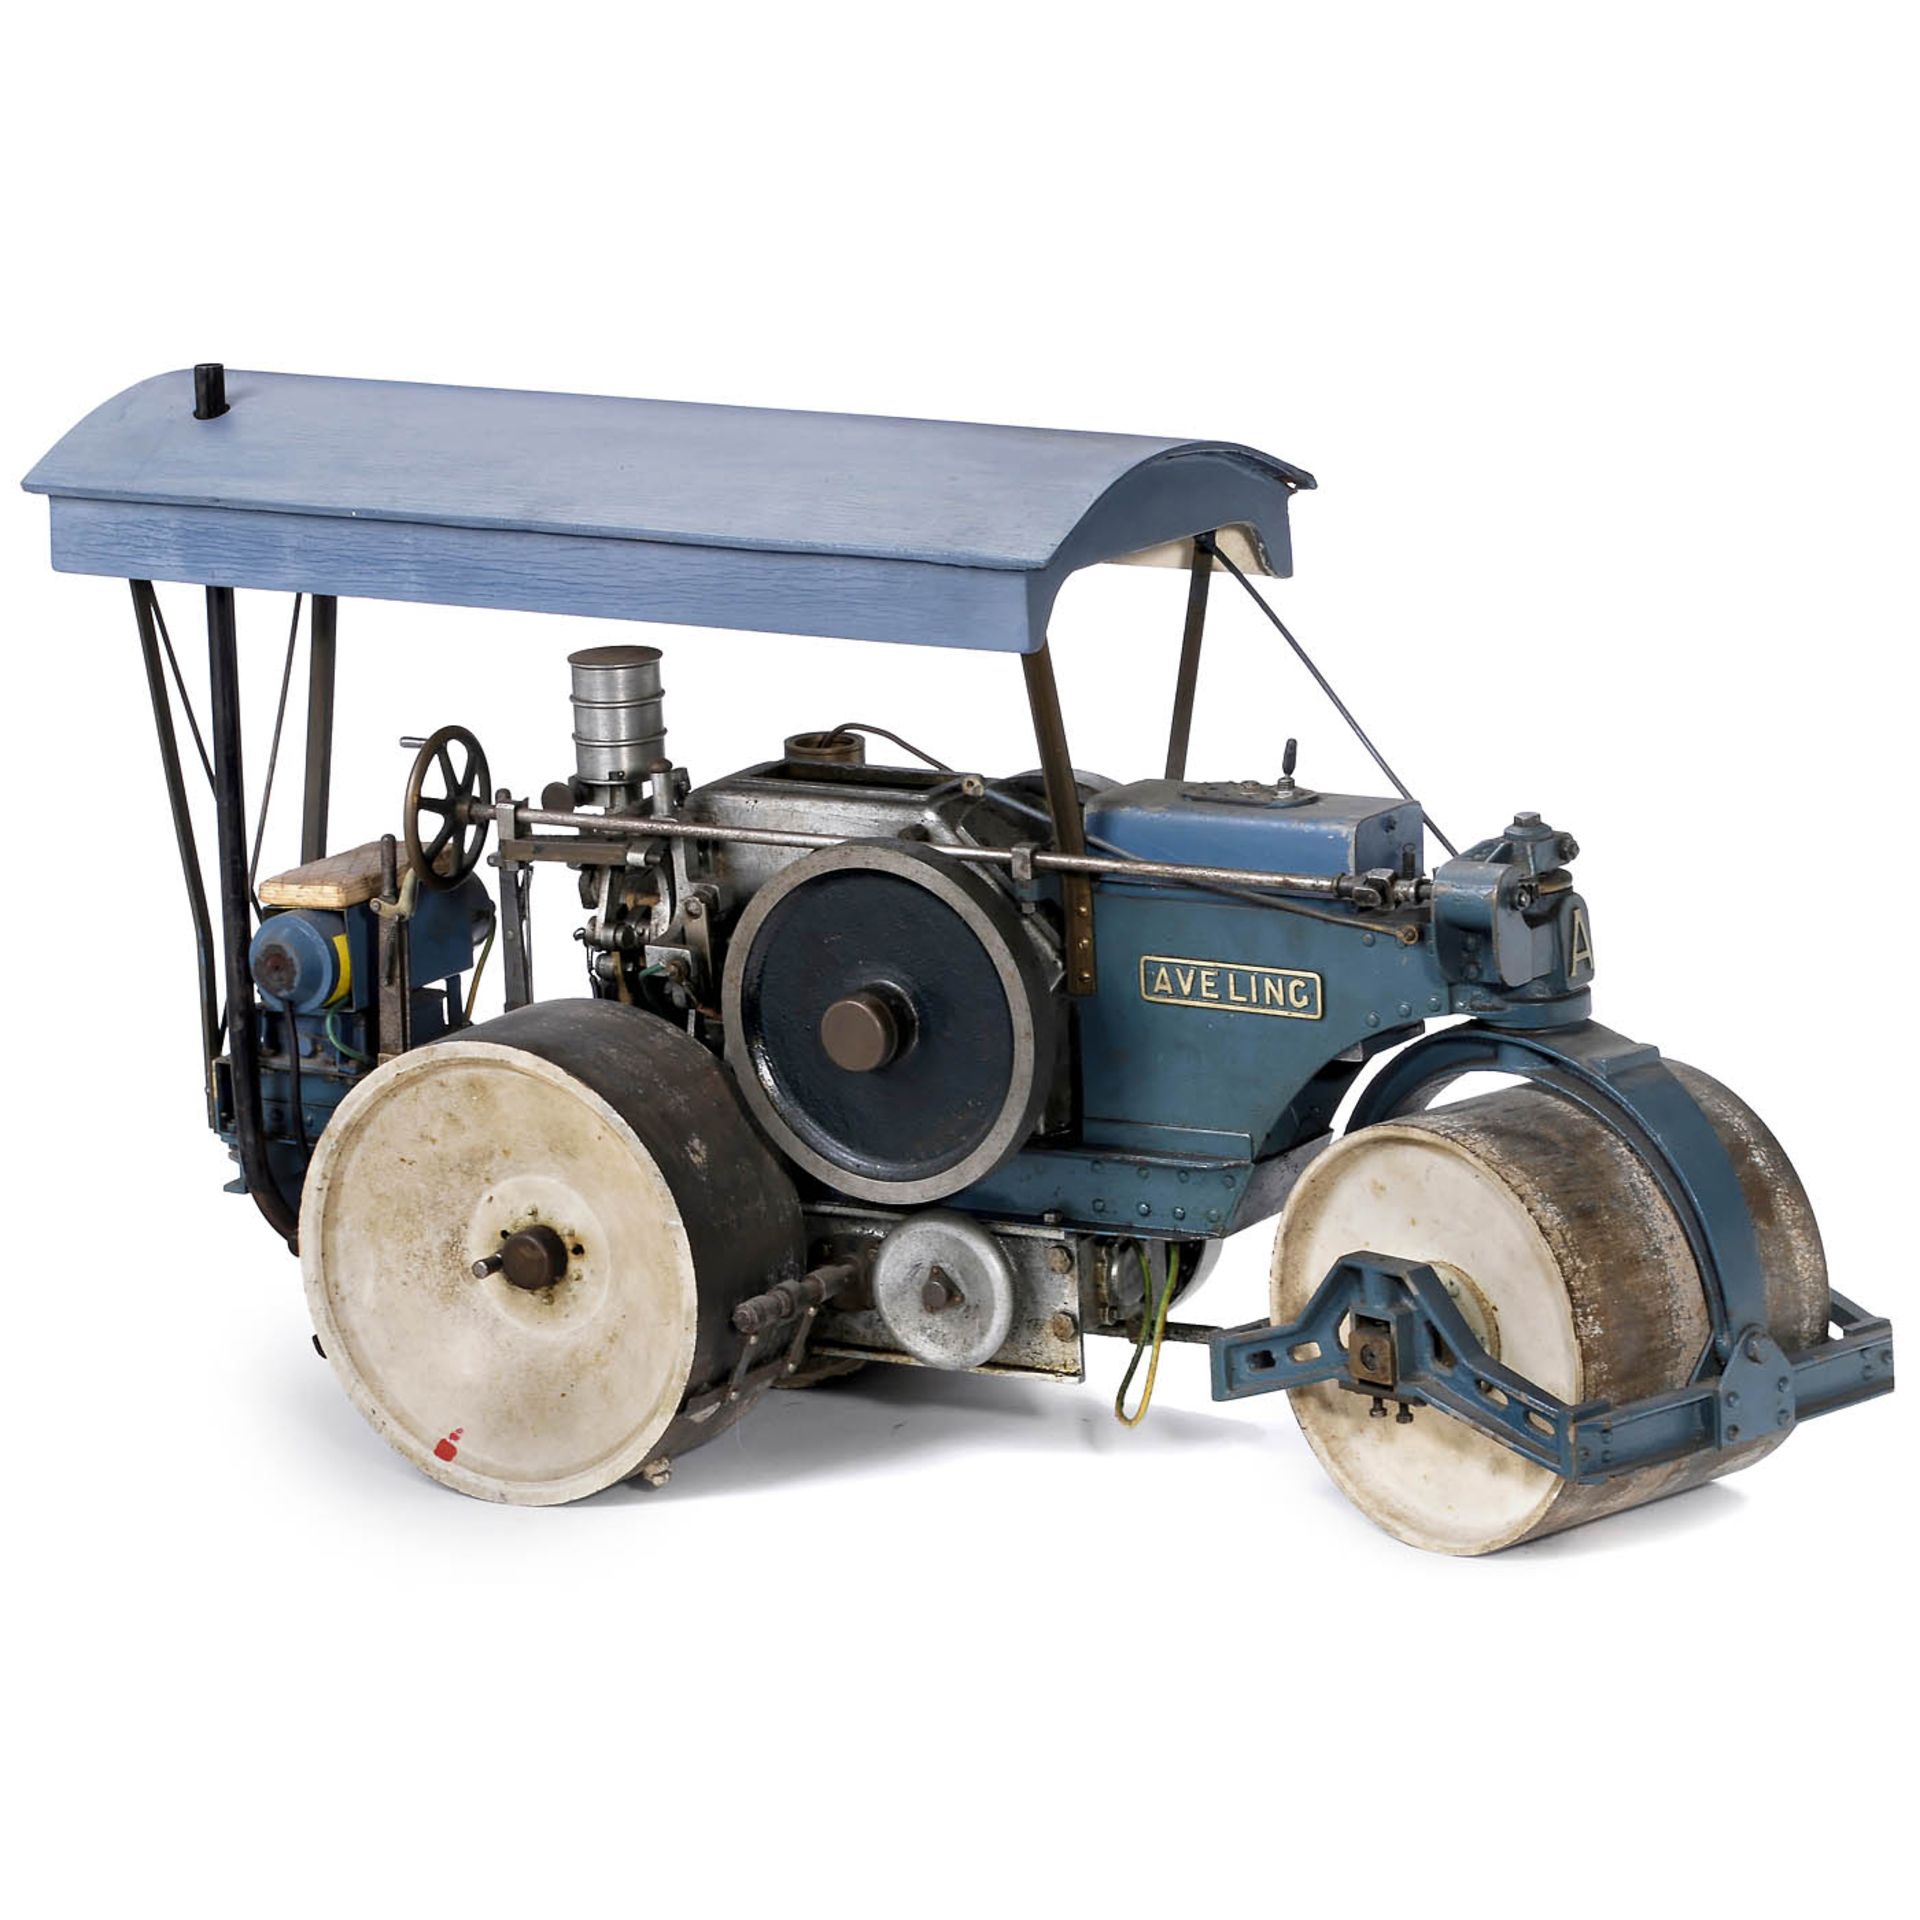 Working Model of a Westbury Aveling Road Roller with Four-Stroke Engine